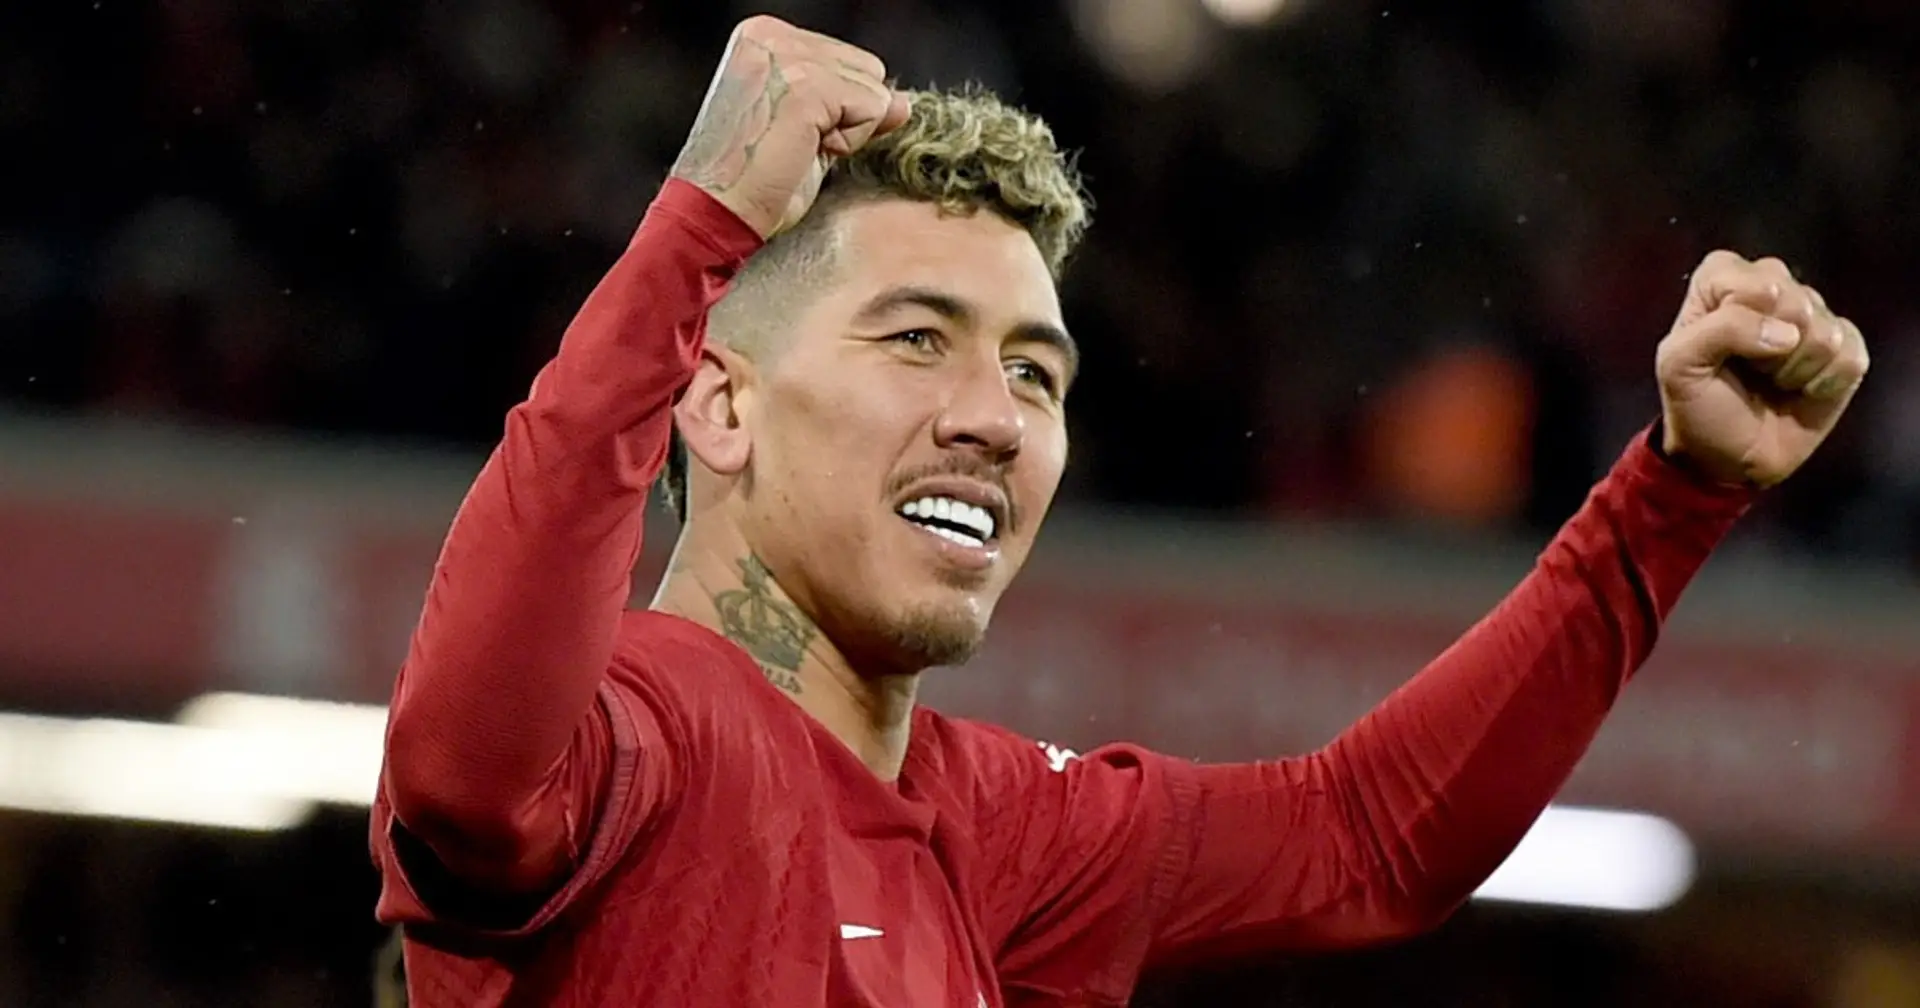 Roberto Firmino's plan after this season revealed - it doesn't involve Premier League stay (reliability: 4 stars)